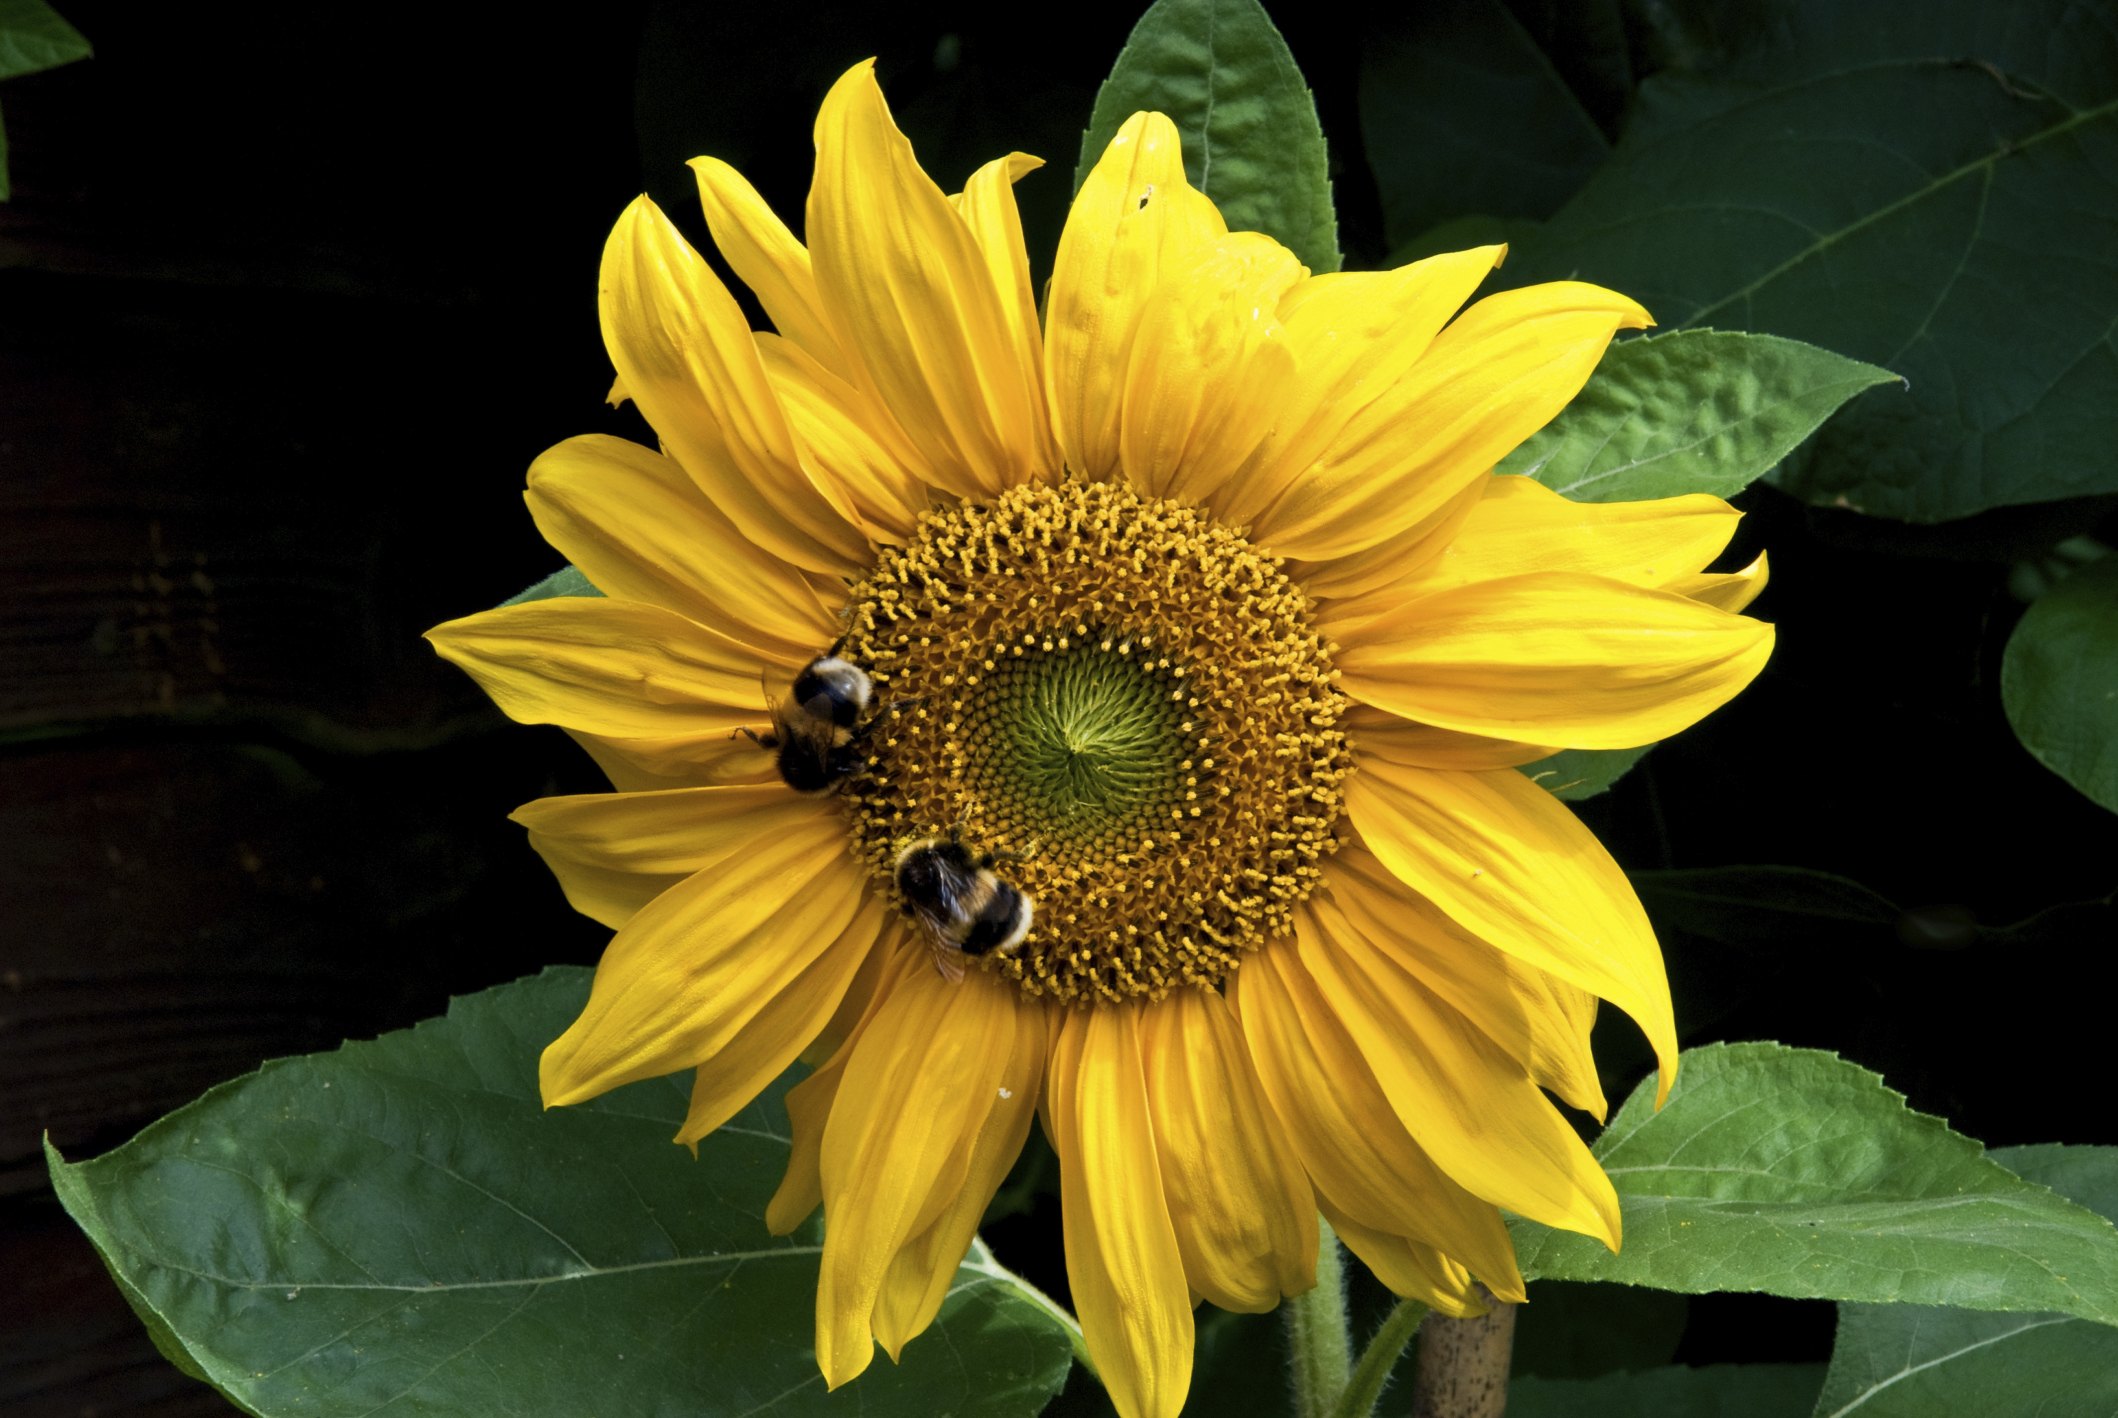 How To Save Sunflower Petals